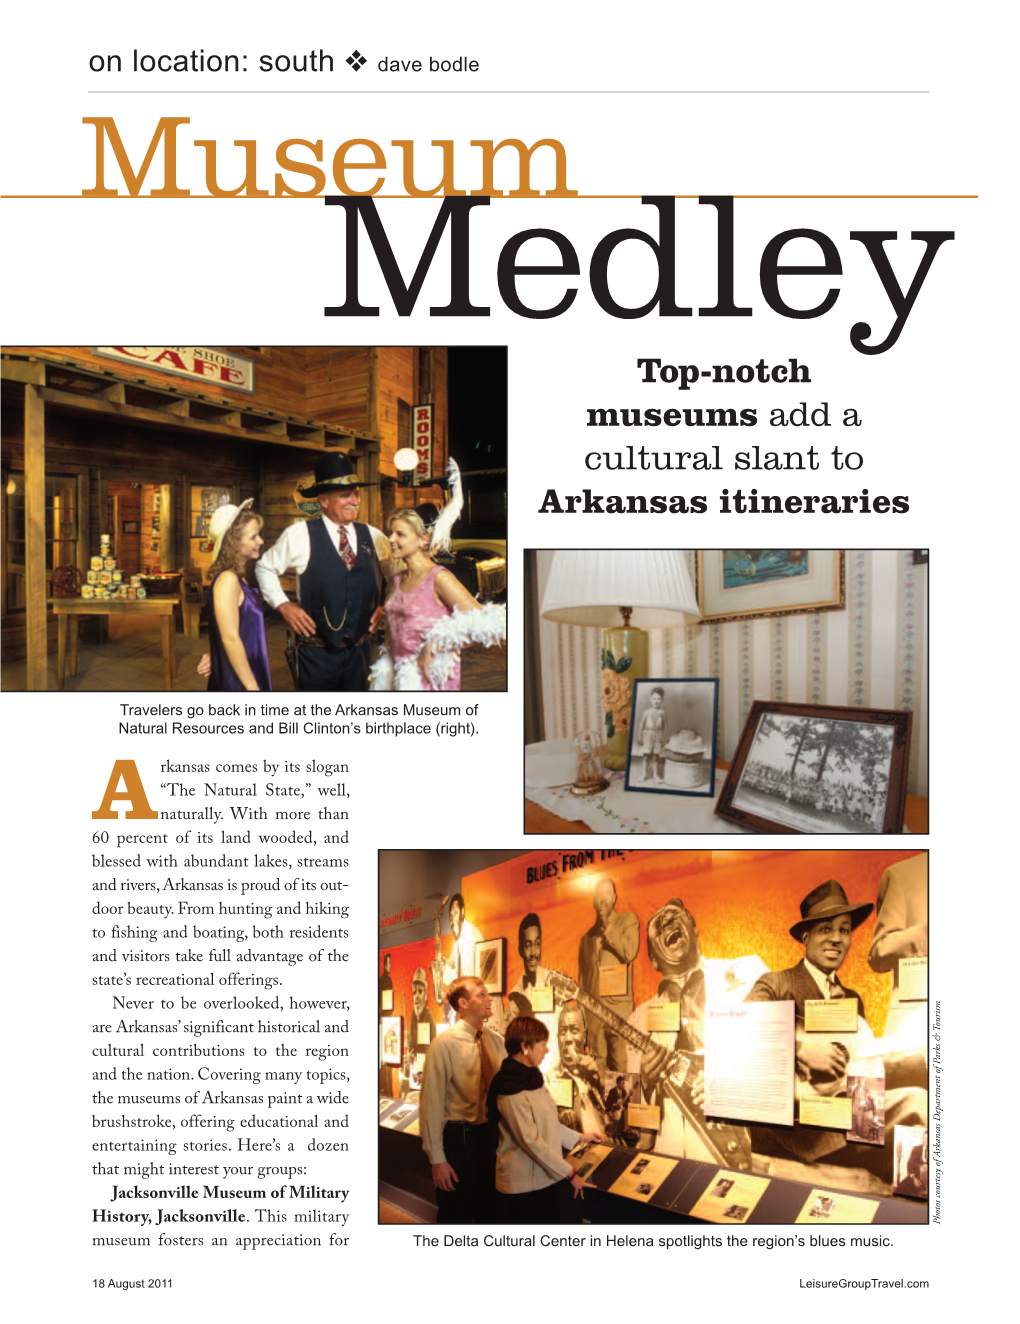 Top-Notch Museums Add a Cultural Slant to Arkansas Itineraries